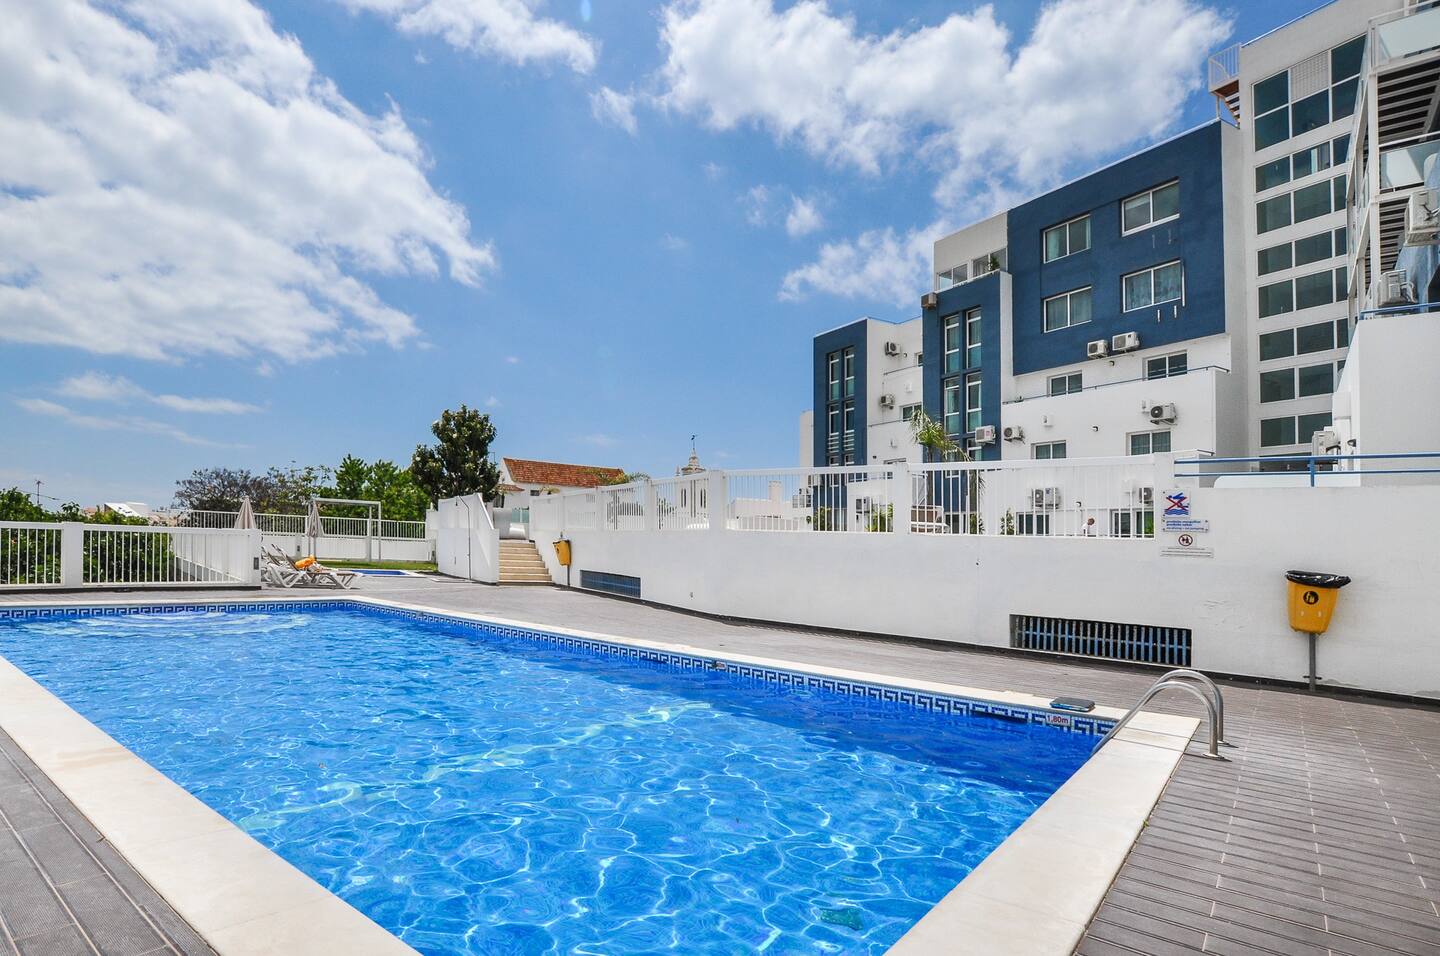 Property Image 1 - Deluxe apartment in Albufeira old town, 200m walk to beach, pool & parking